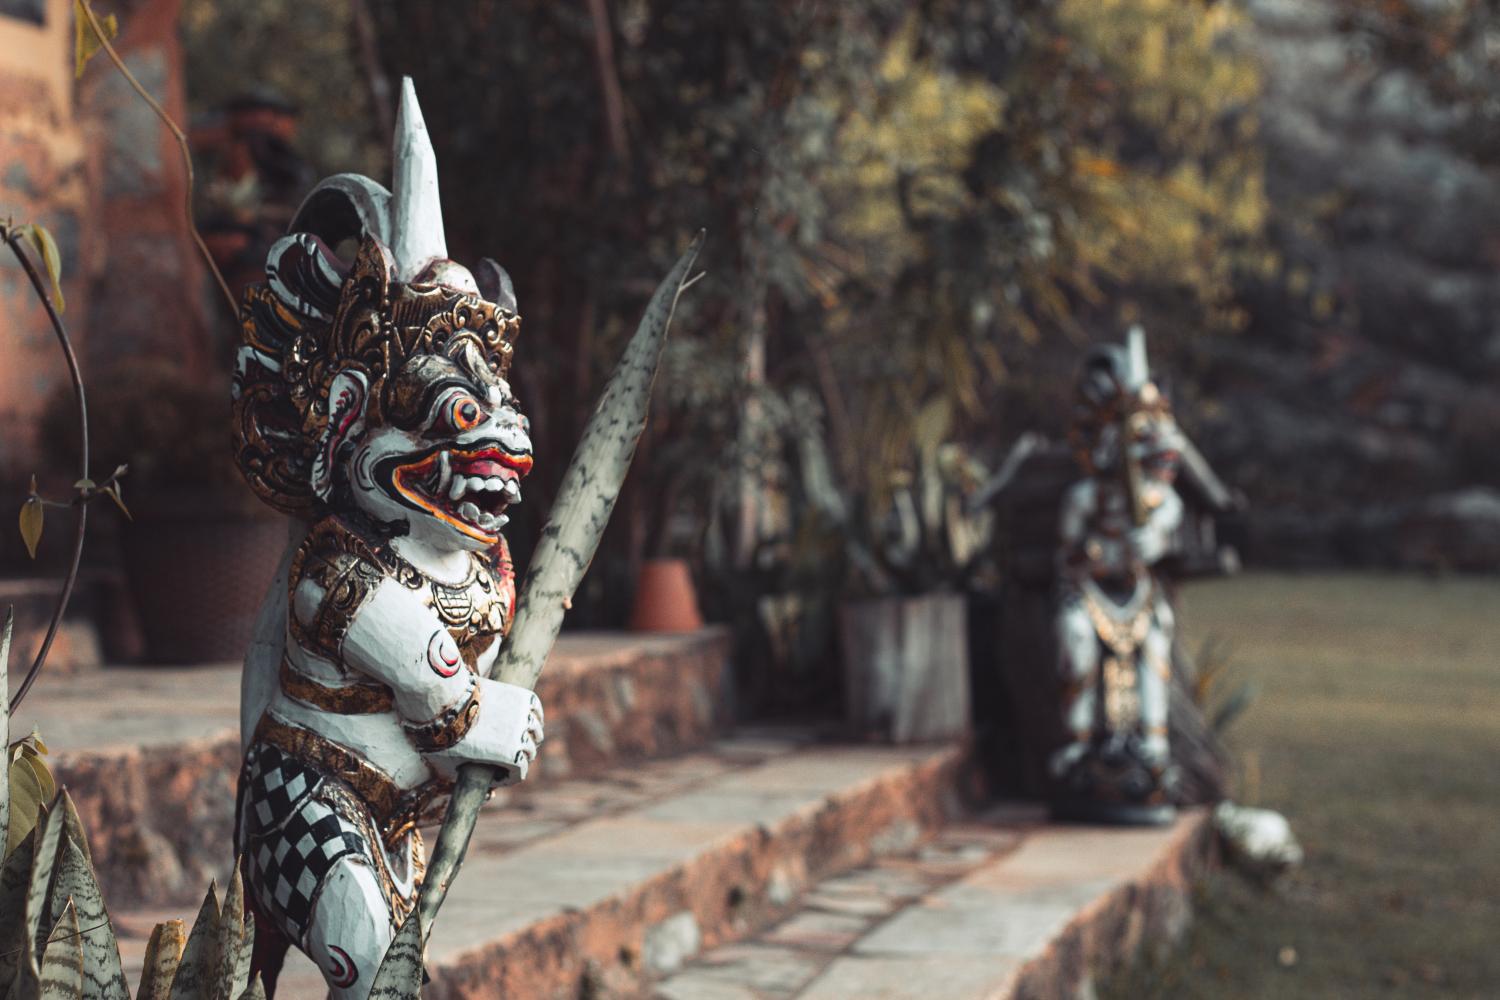 Indonesian Statues